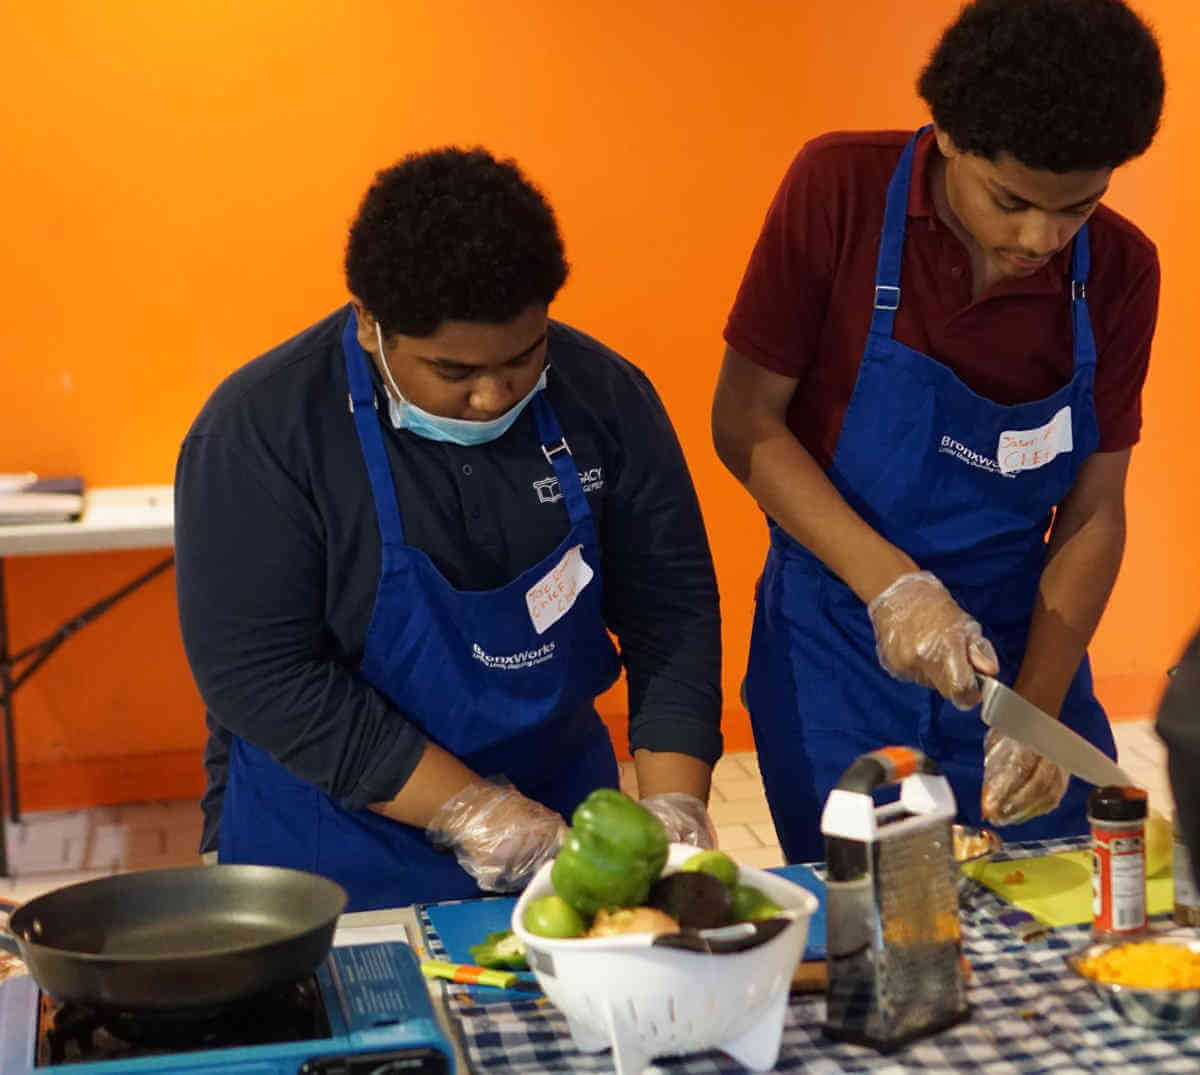 Teen Battle Chef introduces youngsters to health eating|Teen Battle Chef introduces youngsters to health eating